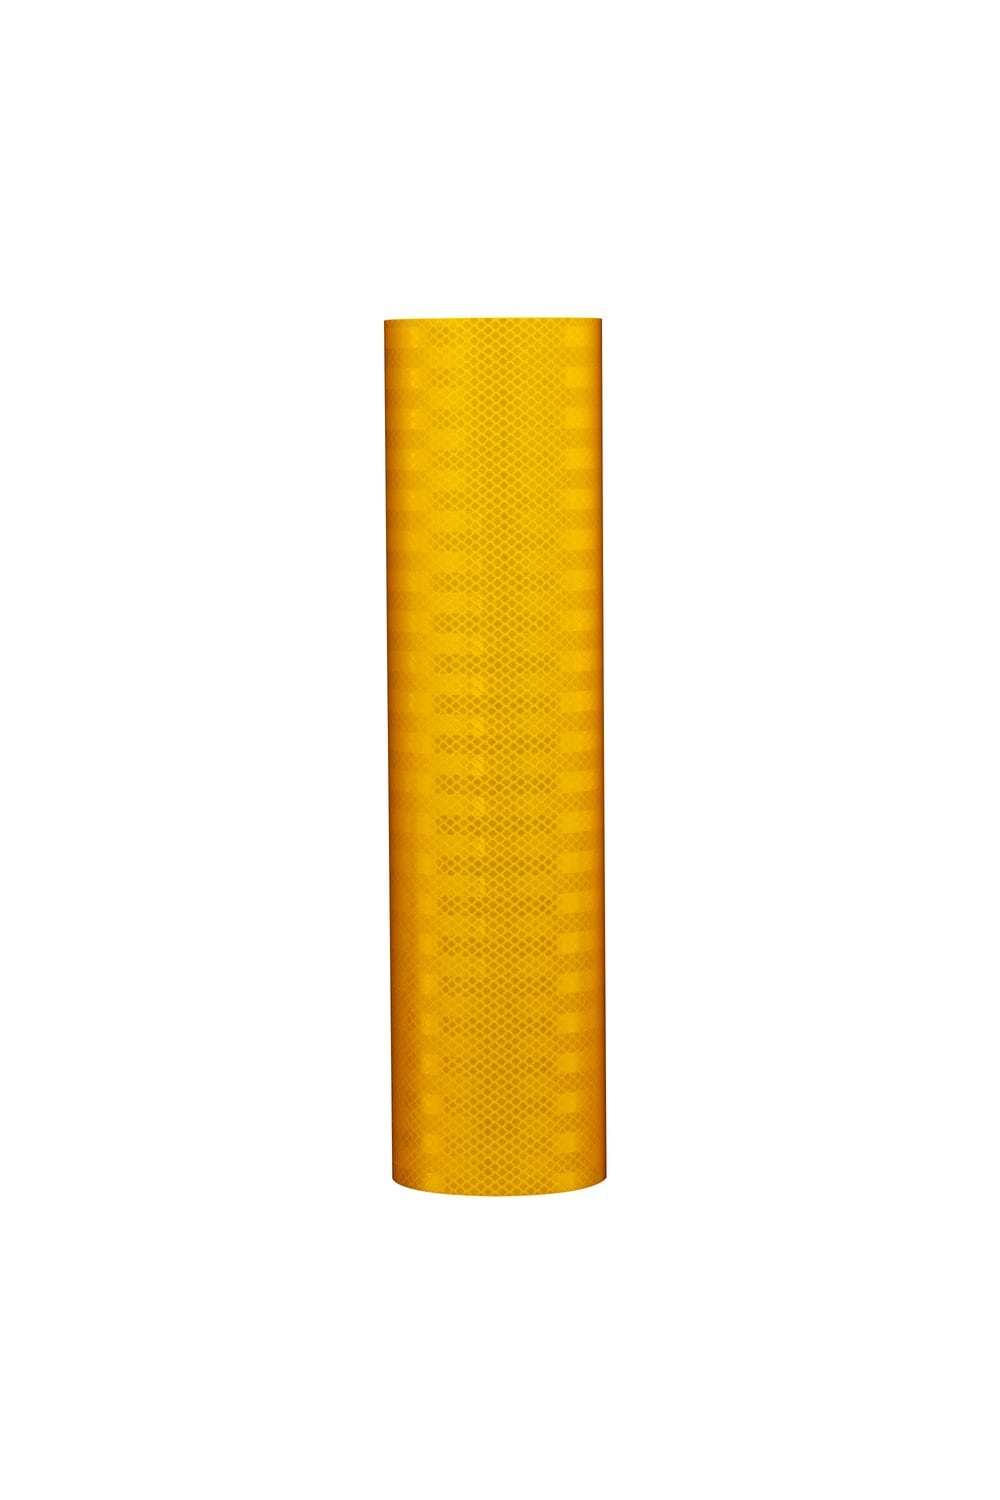 7100015685 - 3M Flexible Prismatic Reflective Sheeting 3311 Yellow, 3 in X 50 yd, 1
Roll/Case